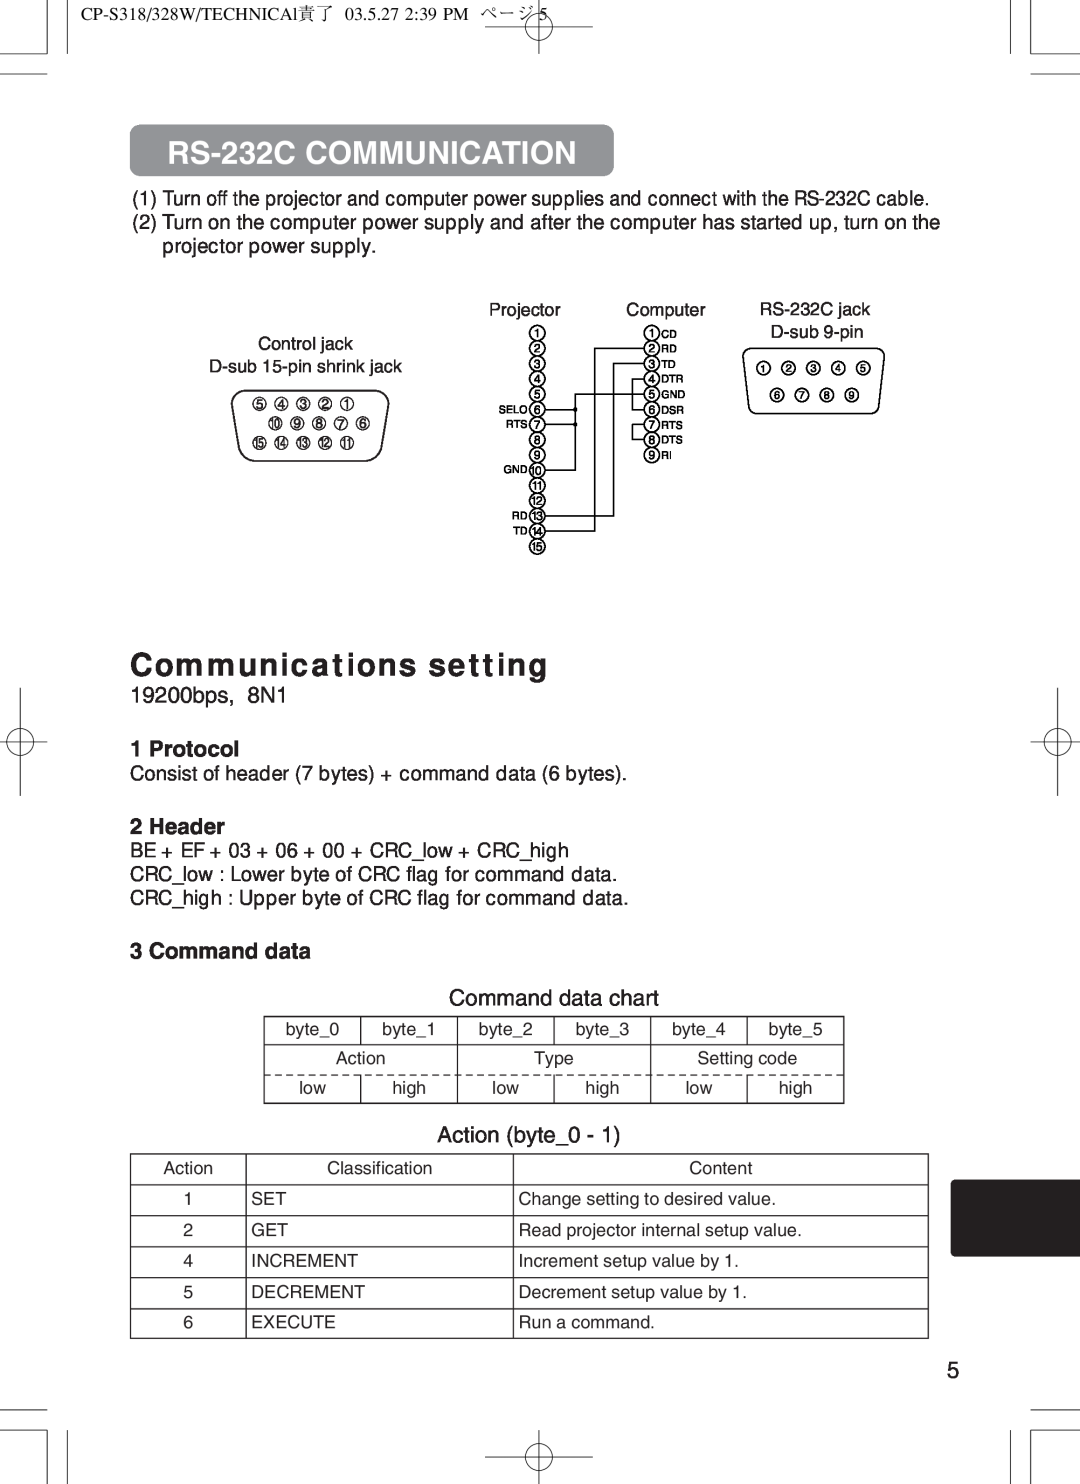 BOXLIGHT CP-322I RS-232C COMMUNICATION, Communications setting, 19200bps, 8N1, Protocol, Header, Command data, 162738495 